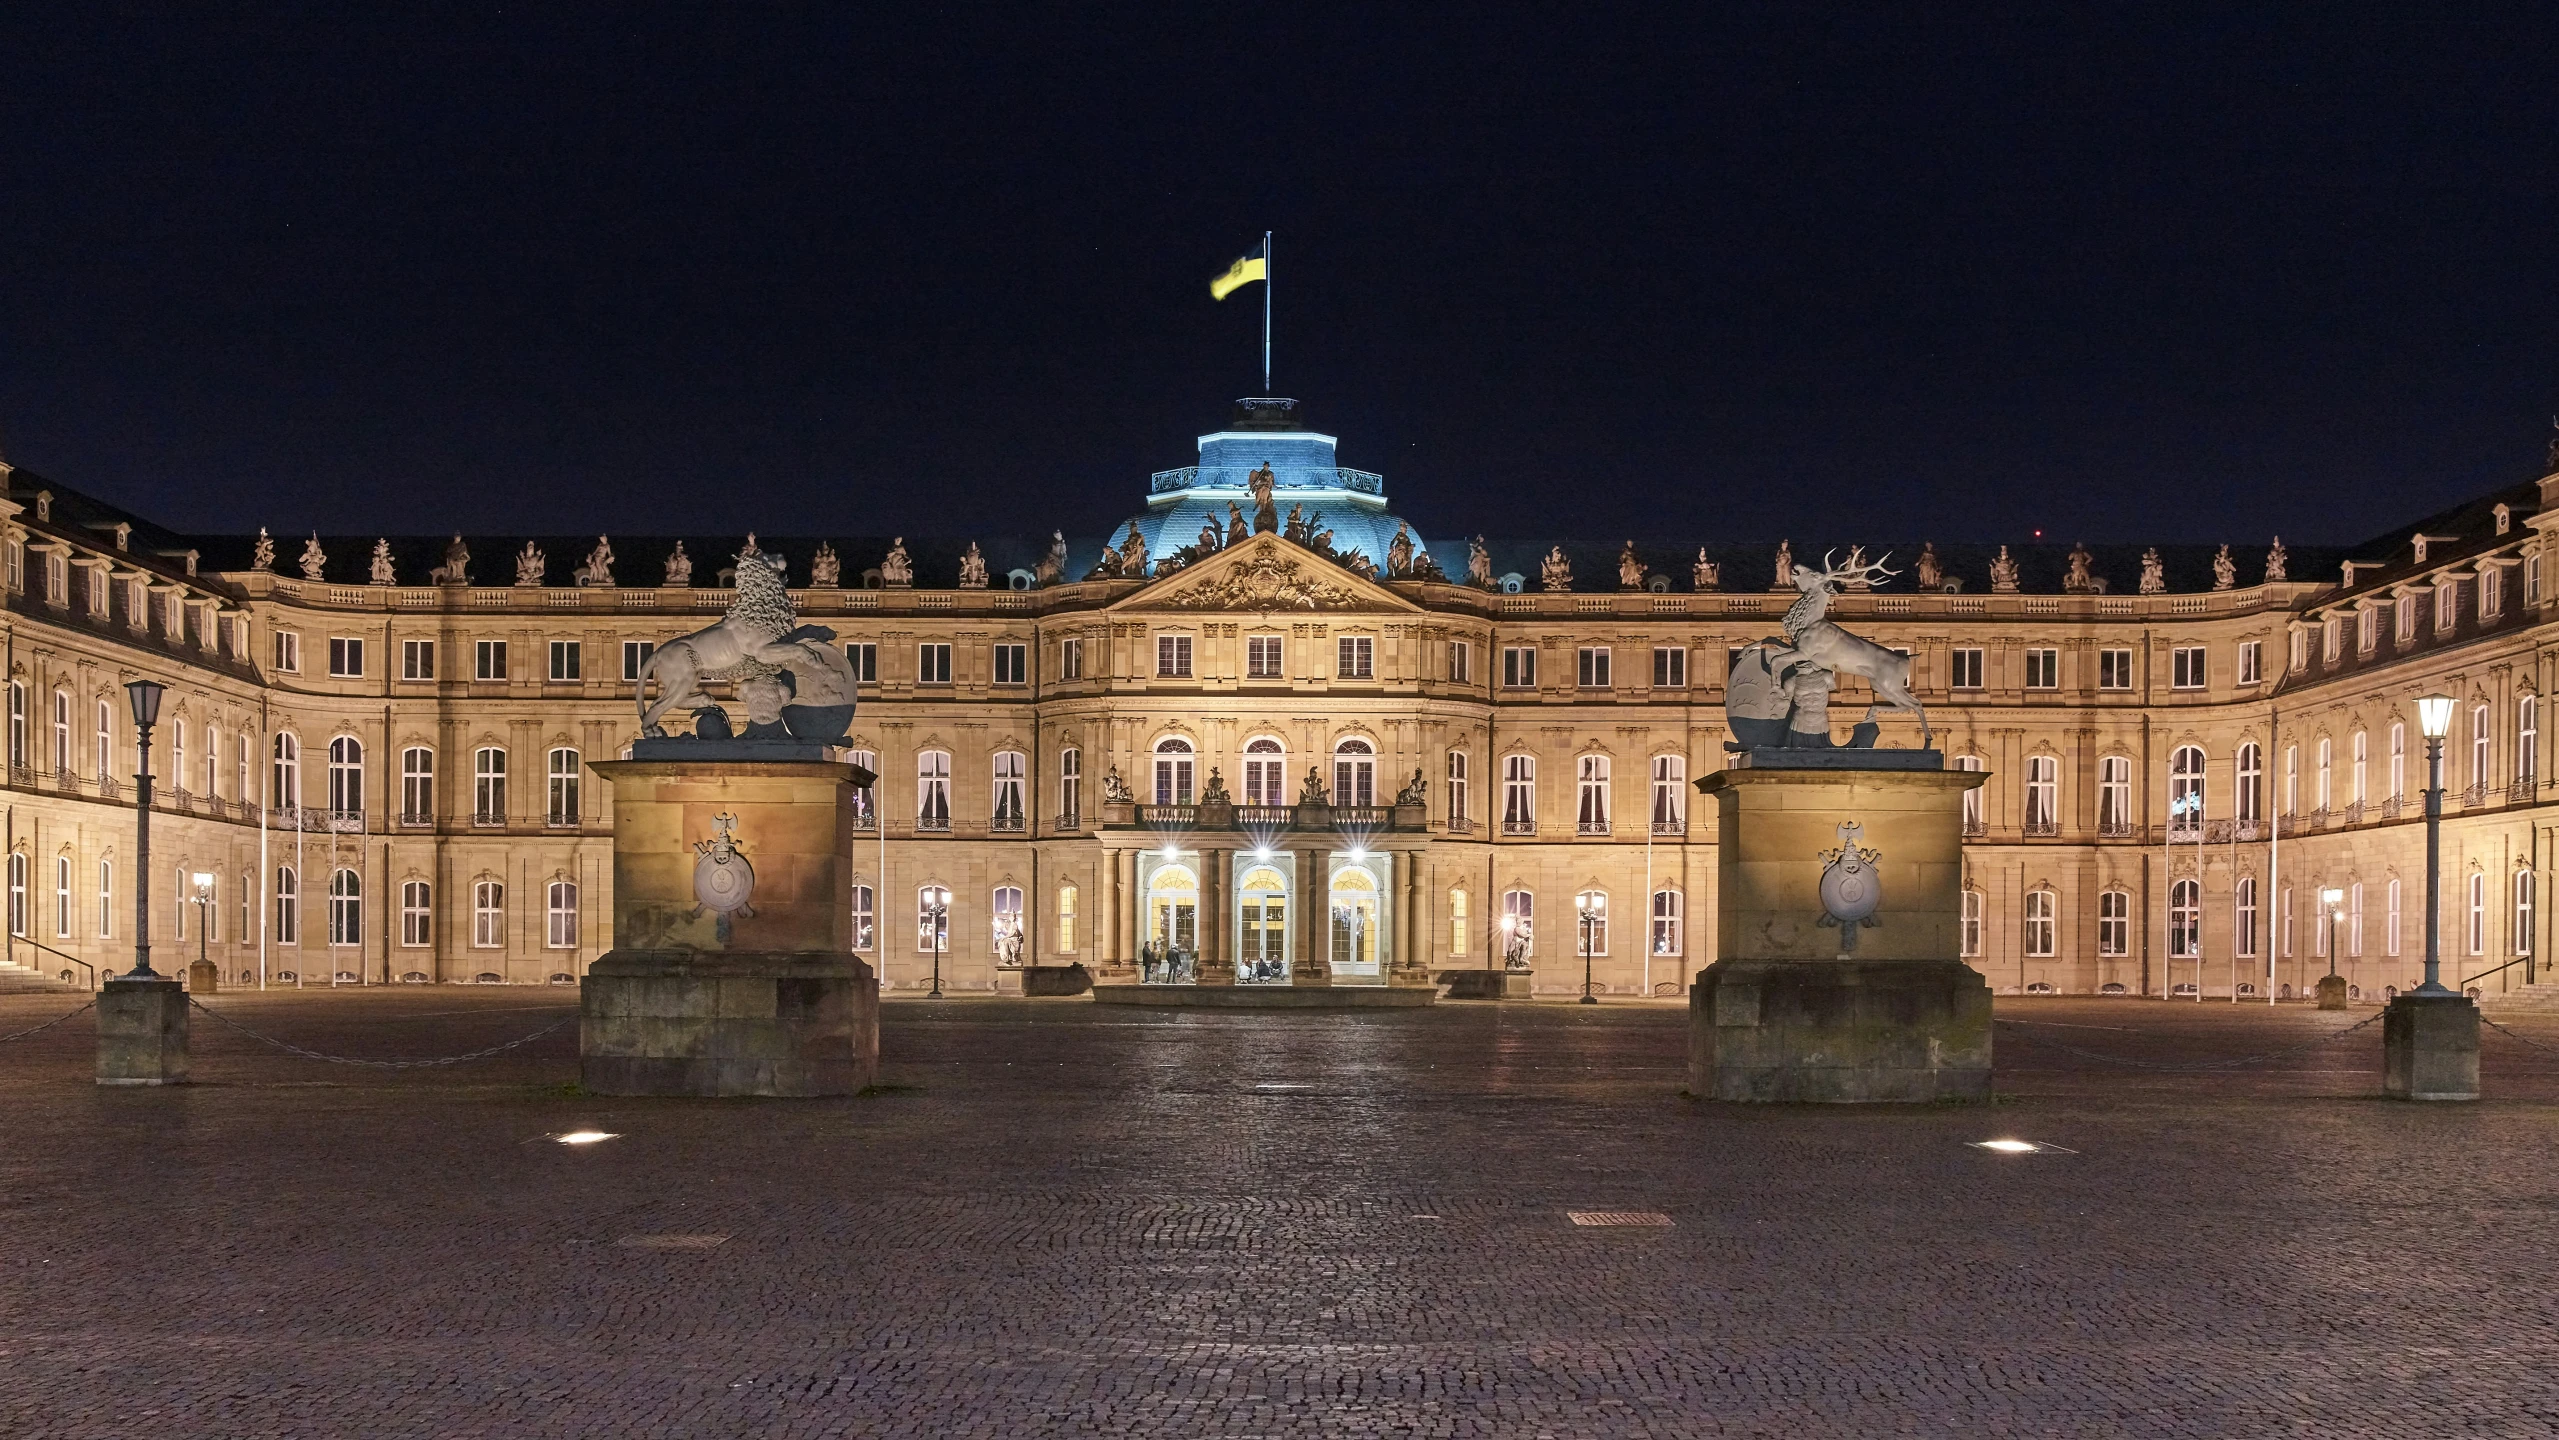 a large stone building has lit up at night